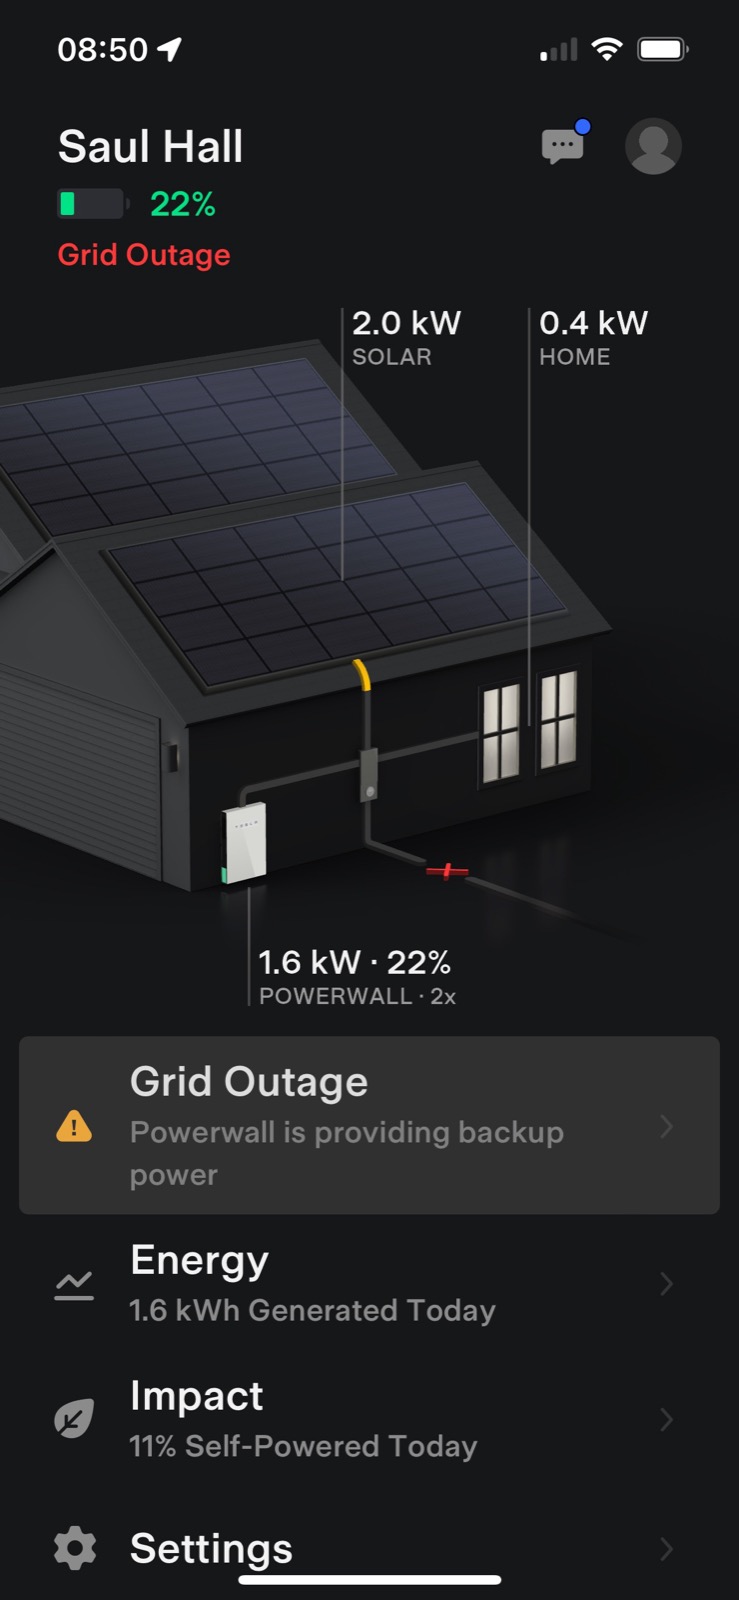 Screenshot of the iOS Tesla app during a power outage showing state of charge of the Powerwall, solar output and home consumption